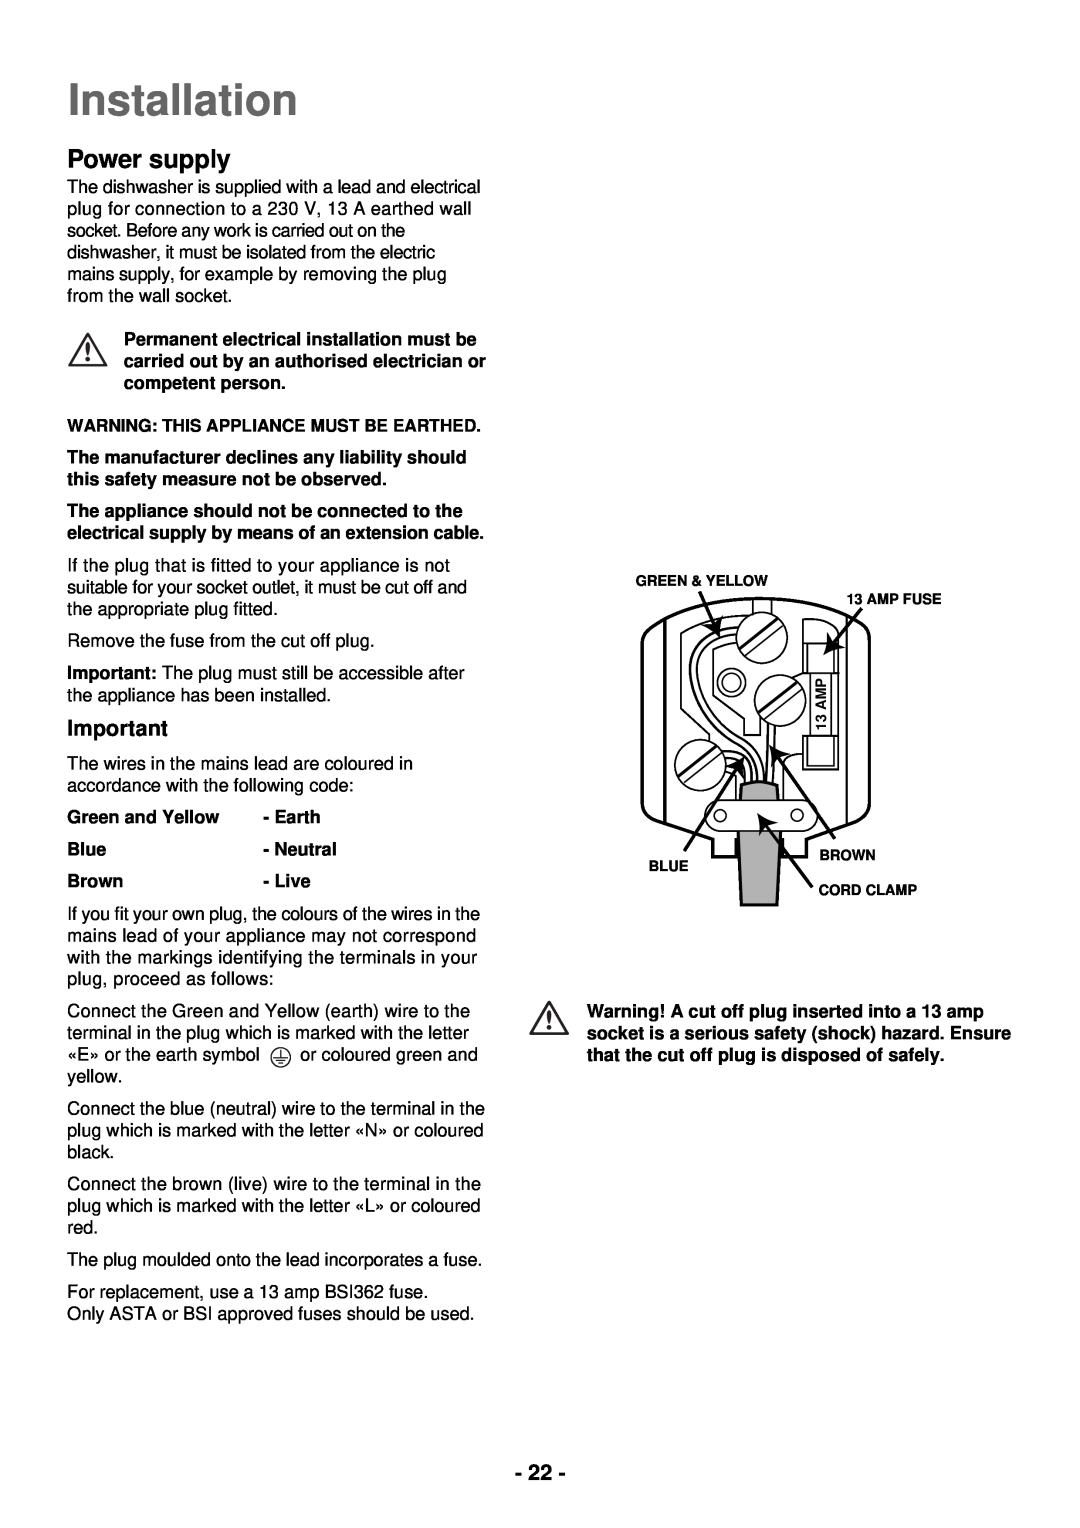 Electrolux ESL 2435 manual Power supply, Installation, Warning This Appliance Must Be Earthed, Green and Yellow 